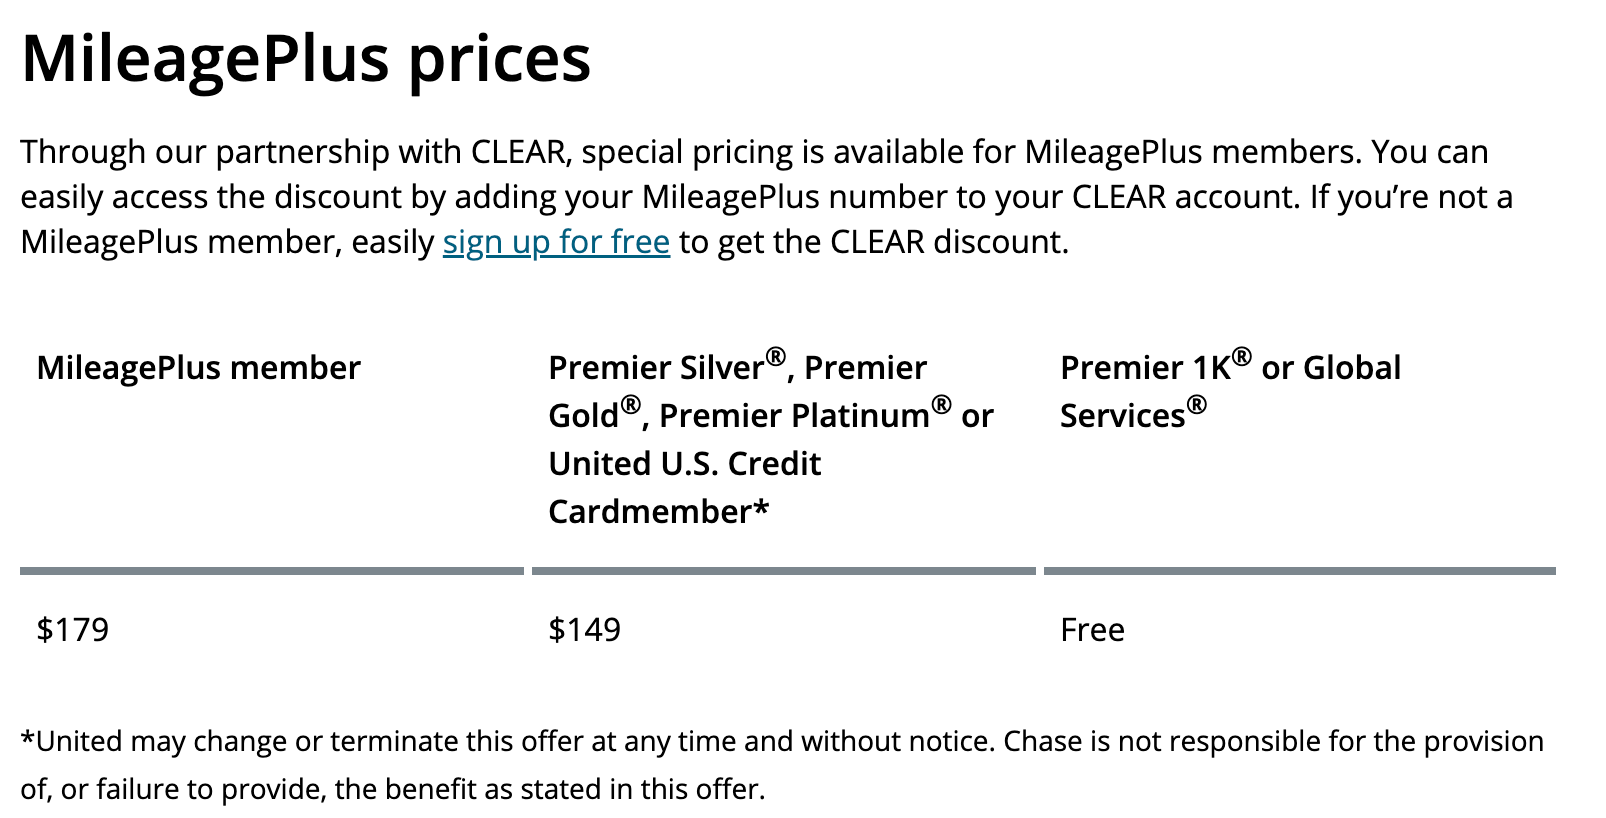 Clear prices for MileagePlus members